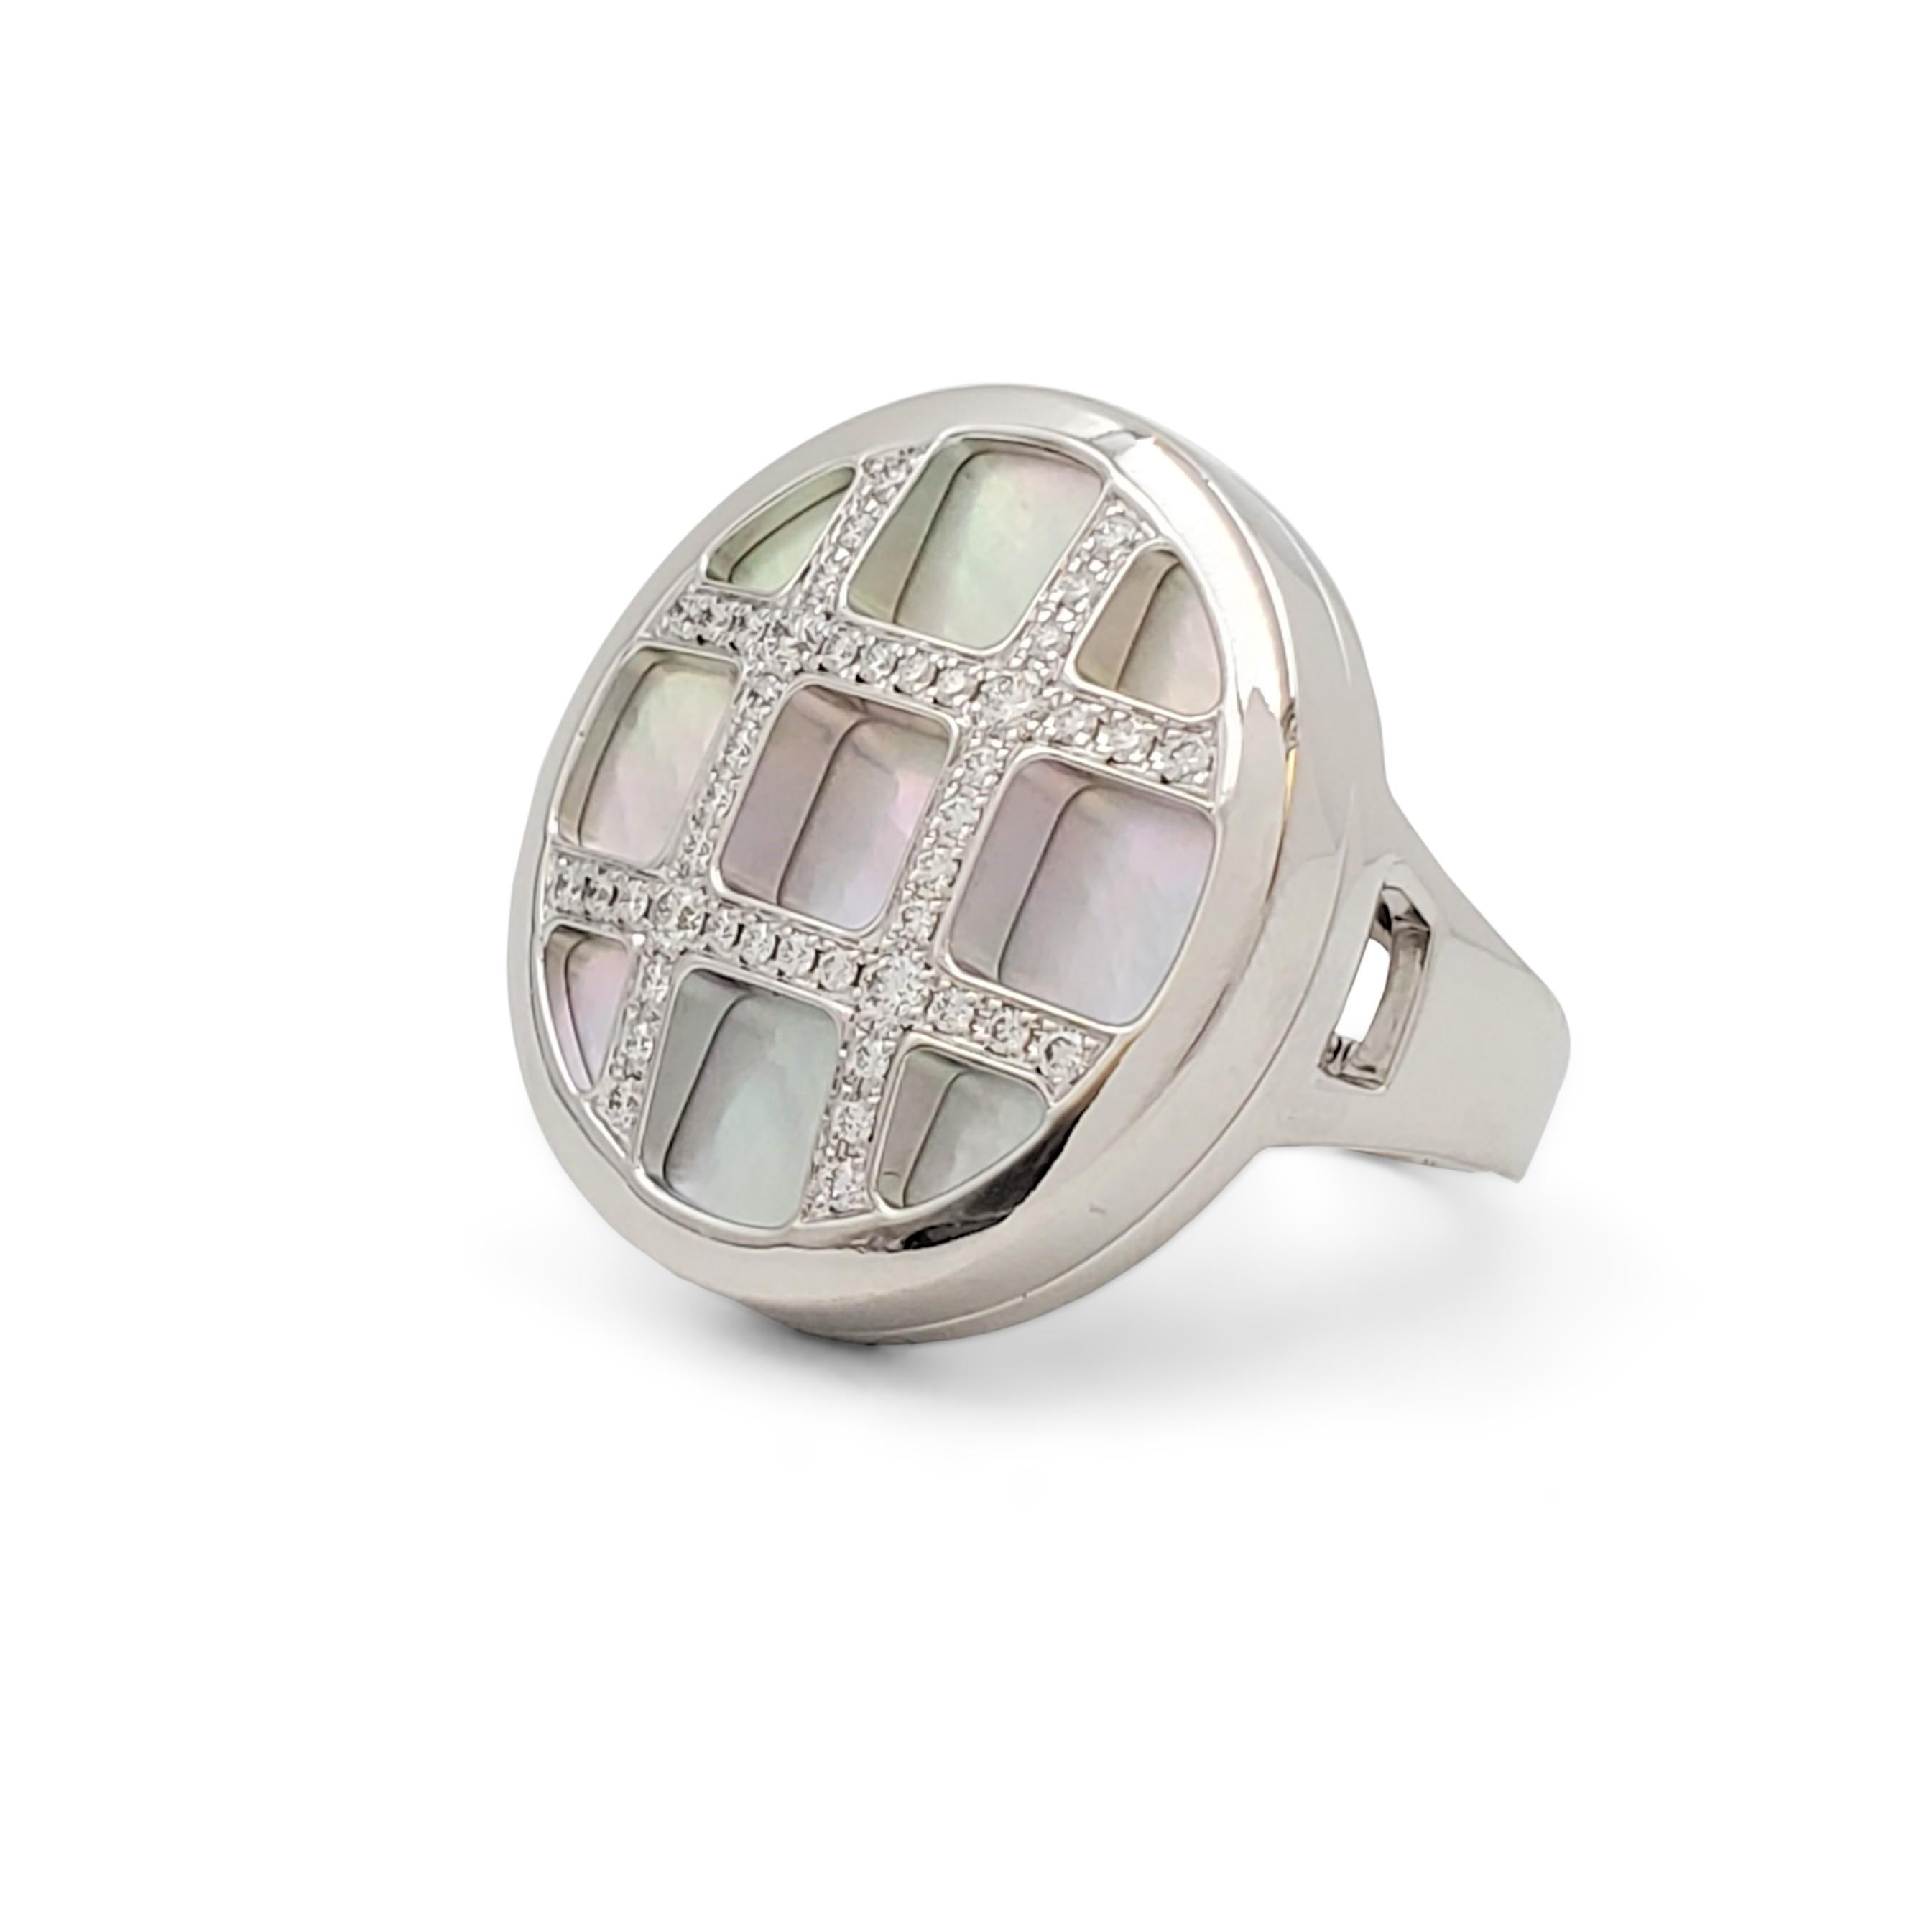 Authentic Cartier 'Pasha' ring crafted in 18 karat white gold designed as a round mother-of-pearl plaque with a lattice overlay set with an estimated 0.56 carats of round brilliant cut diamonds. Signed Cartier, 750, 54, with serial number. The ring